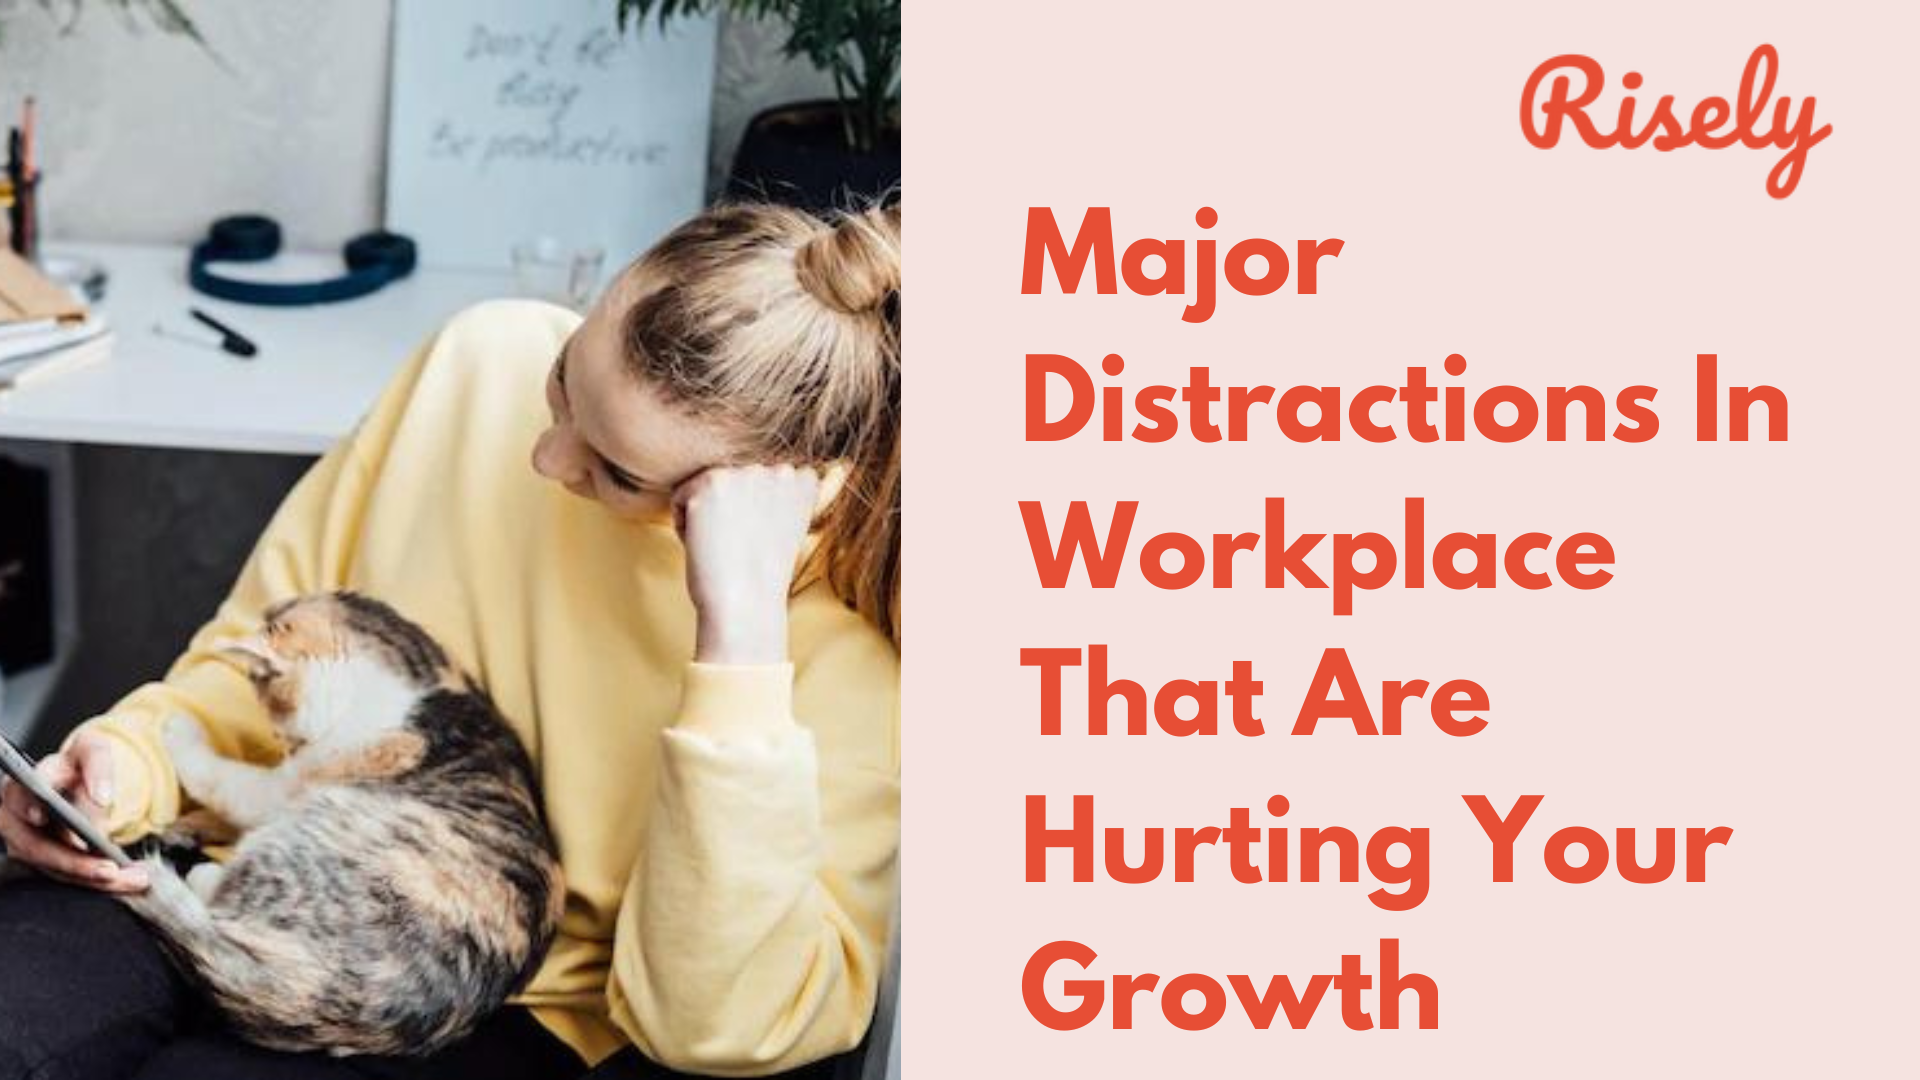 Major Distractions In Workplace That Are Hurting Your Growth